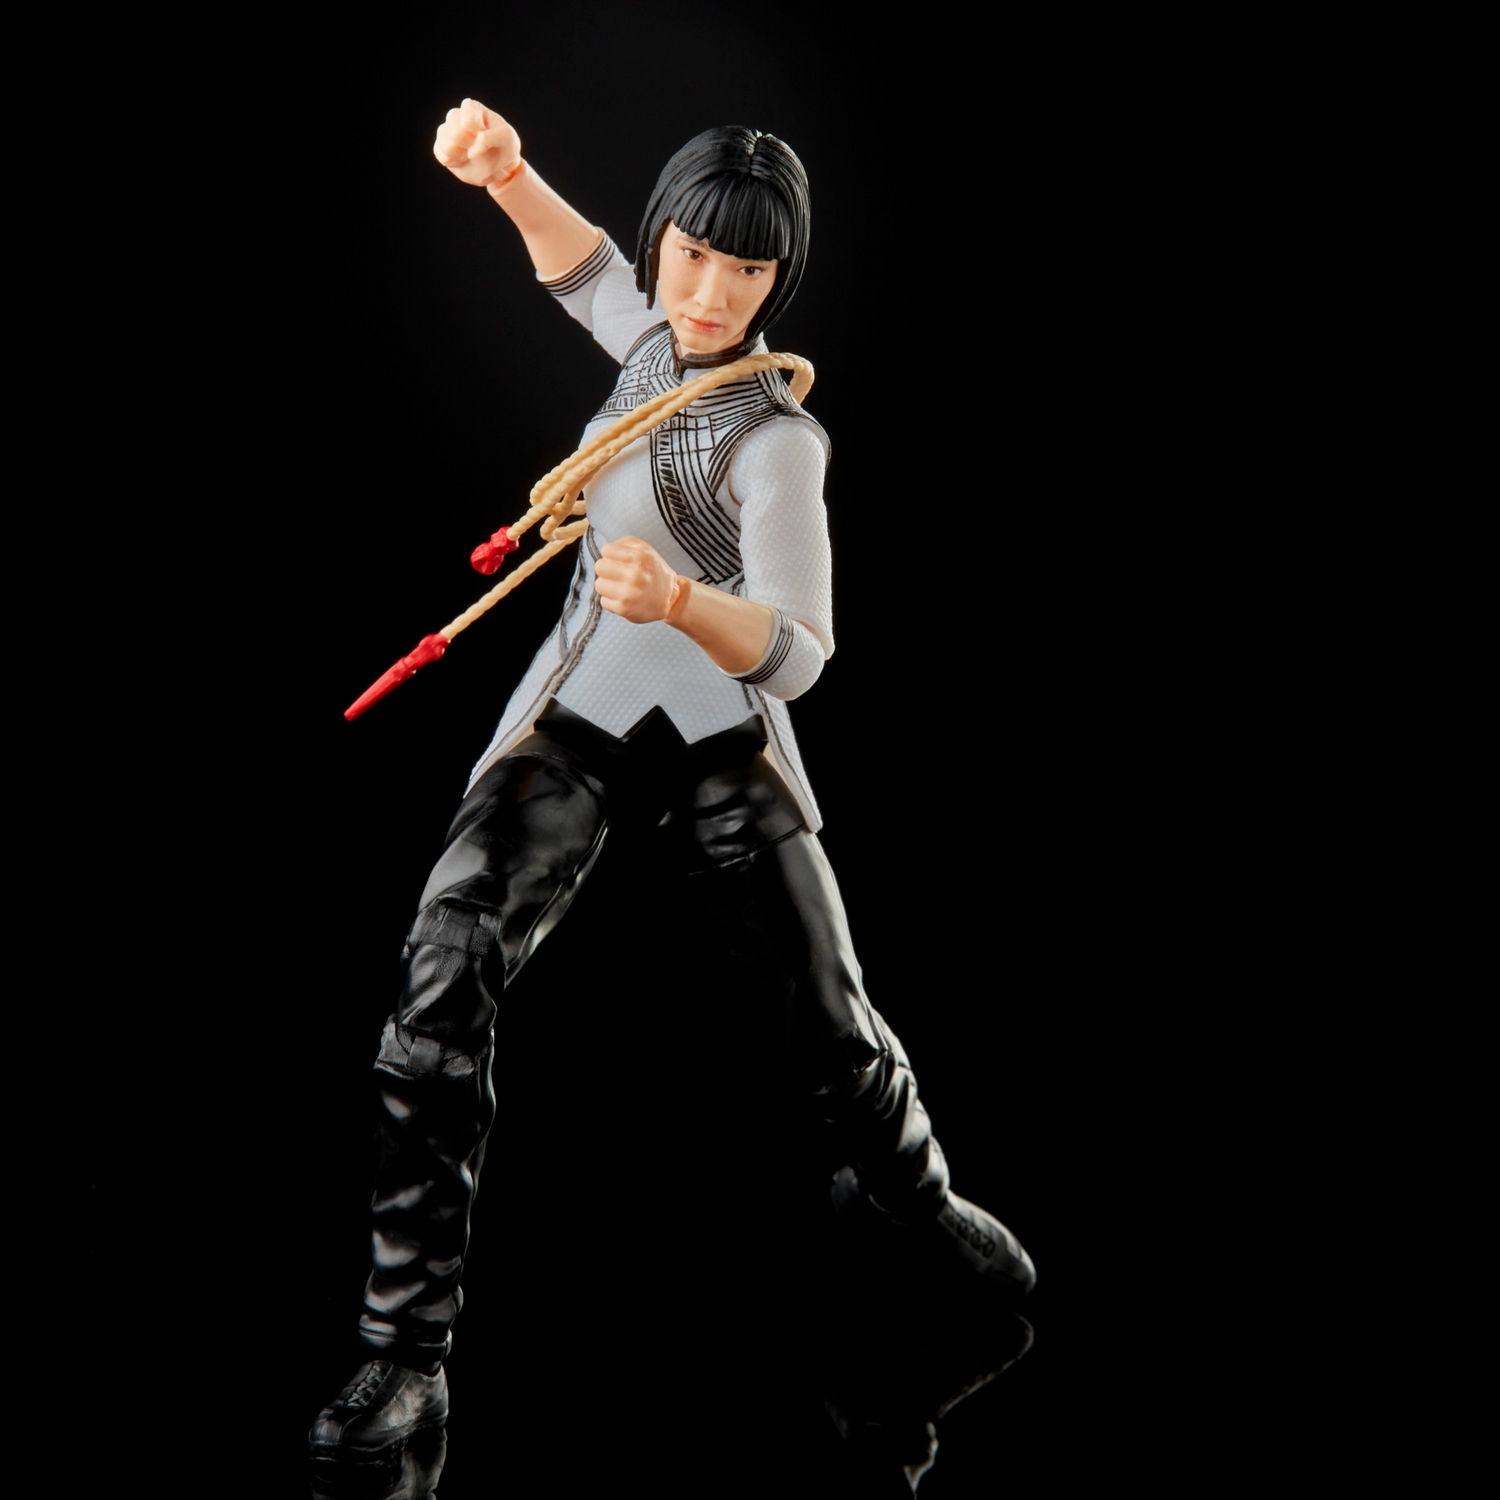 MARVEL LEGENDS SERIES 6-INCH SHANG-CHI AND THE LEGEND OF THE TEN RINGS - Xialing oop4.jpg